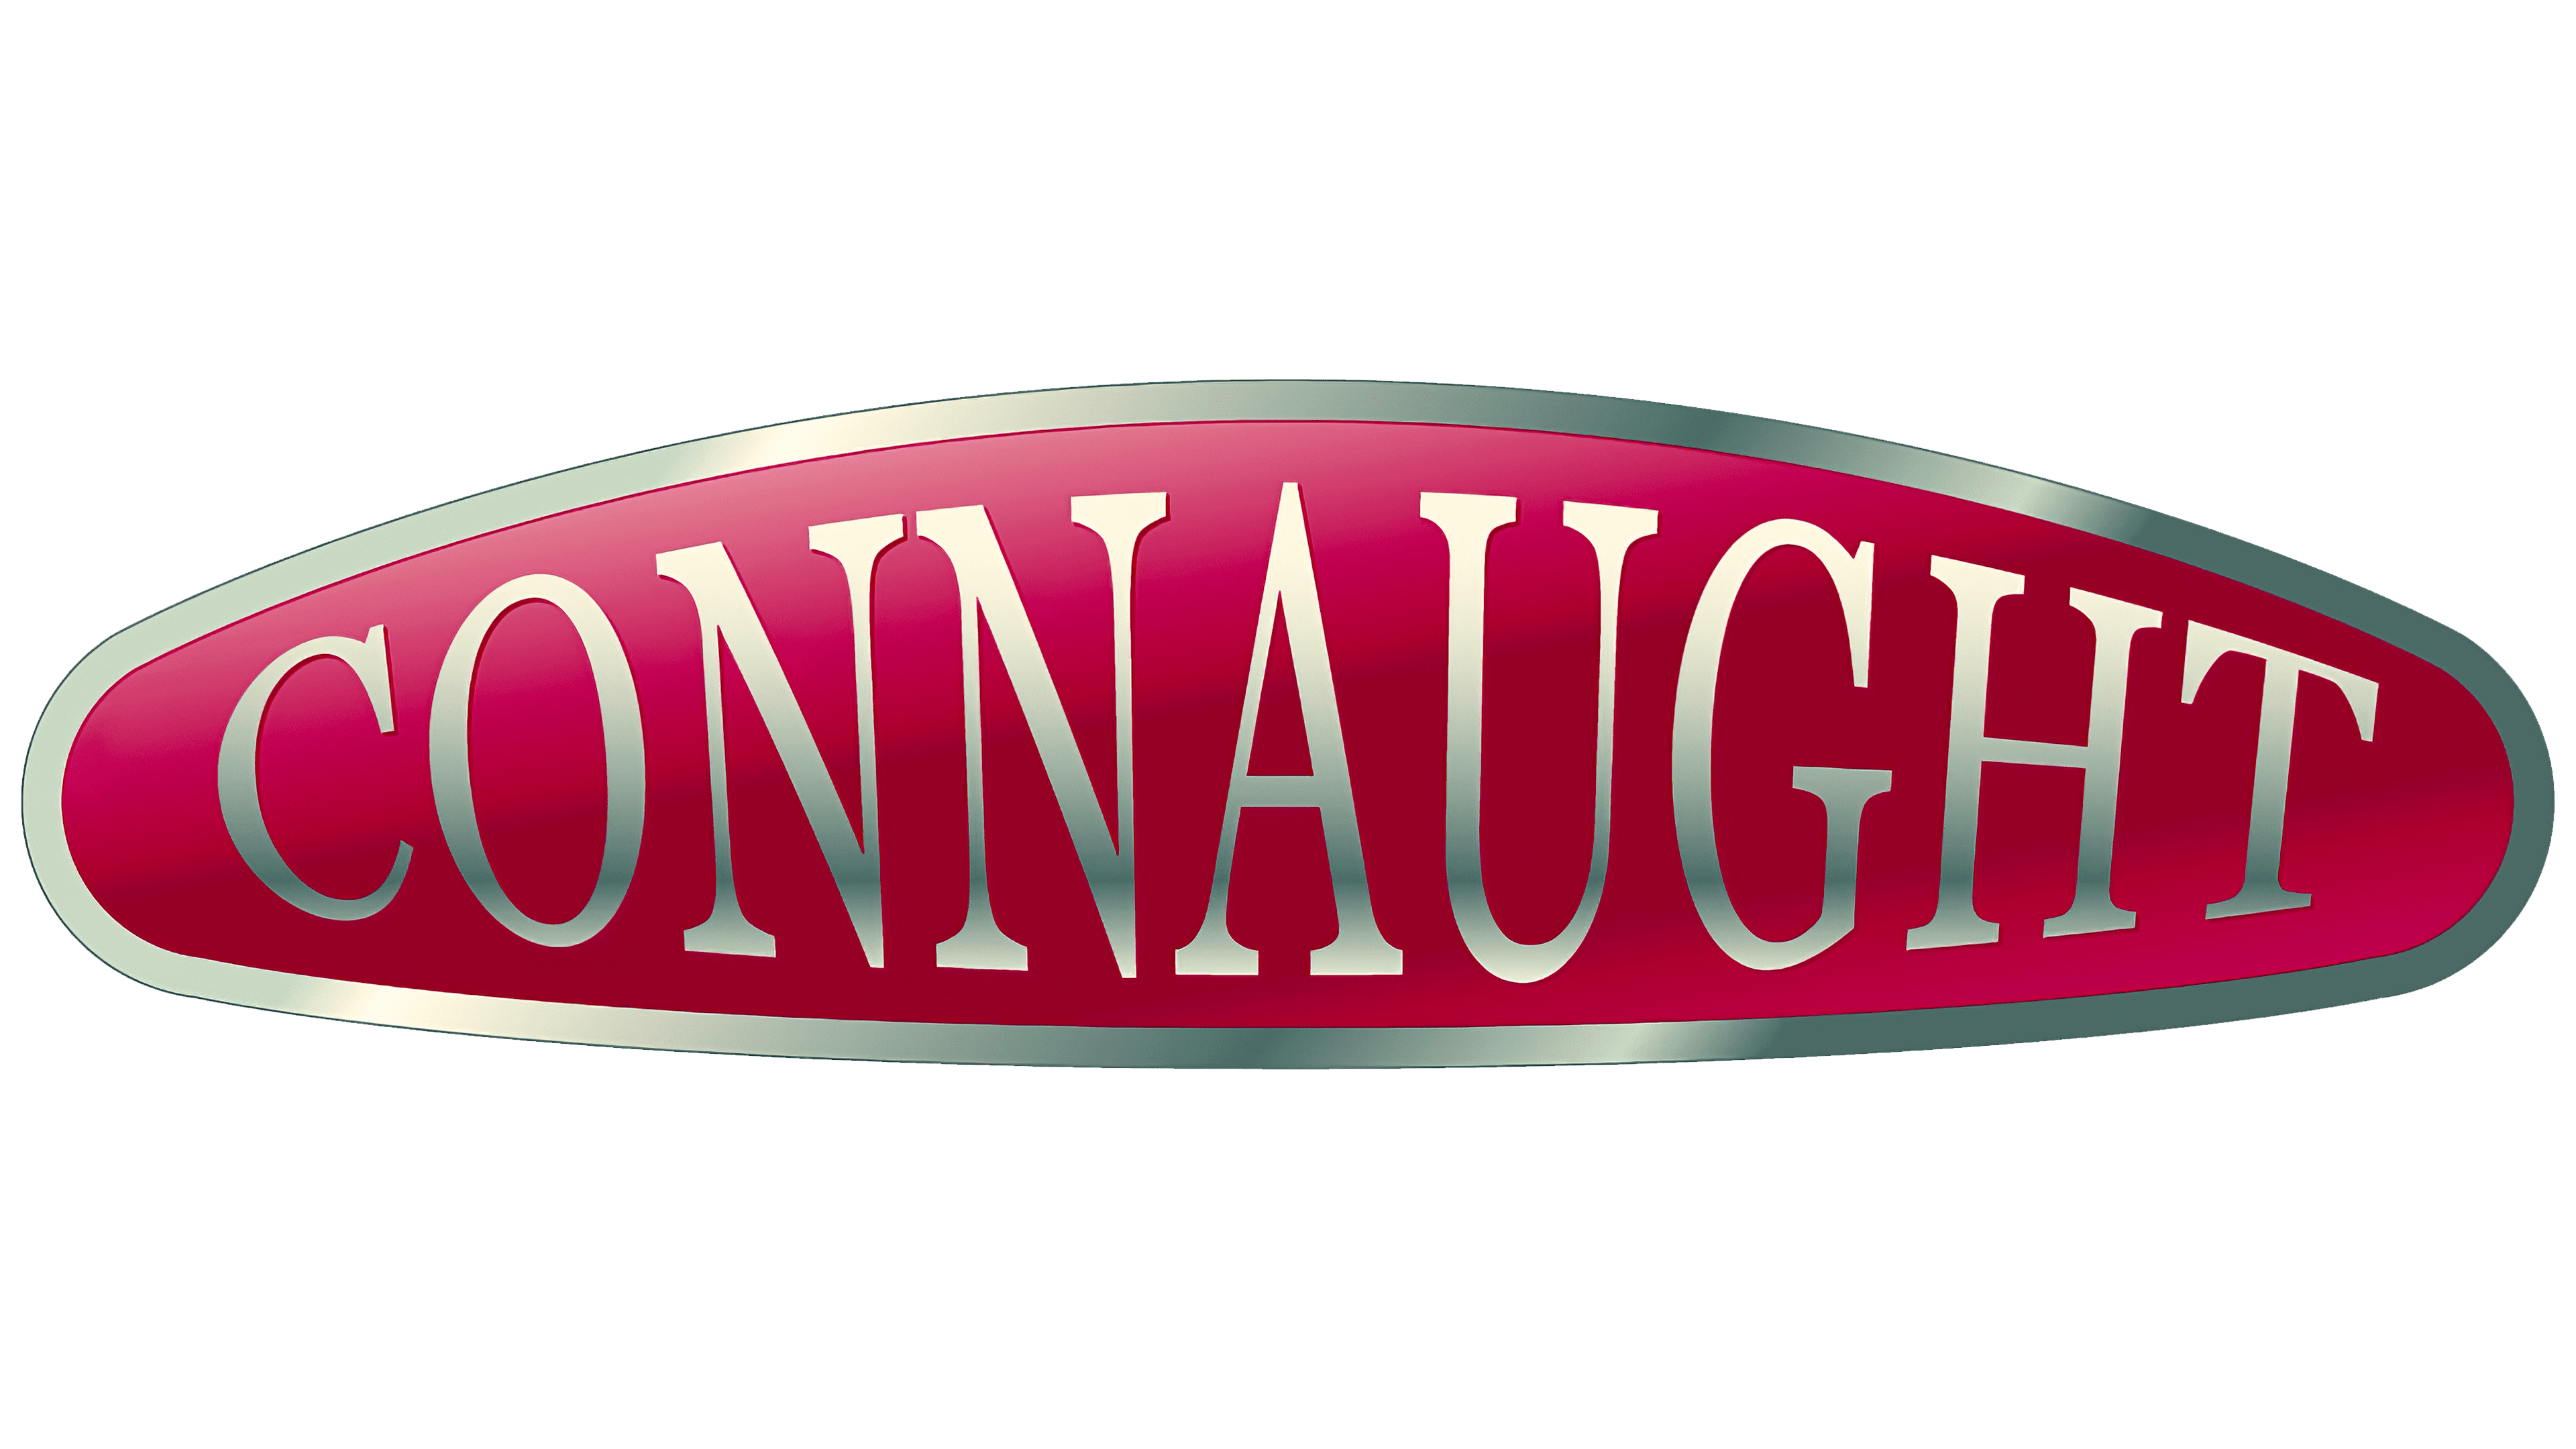 Connaught Motor Company Transparent PNG Logo